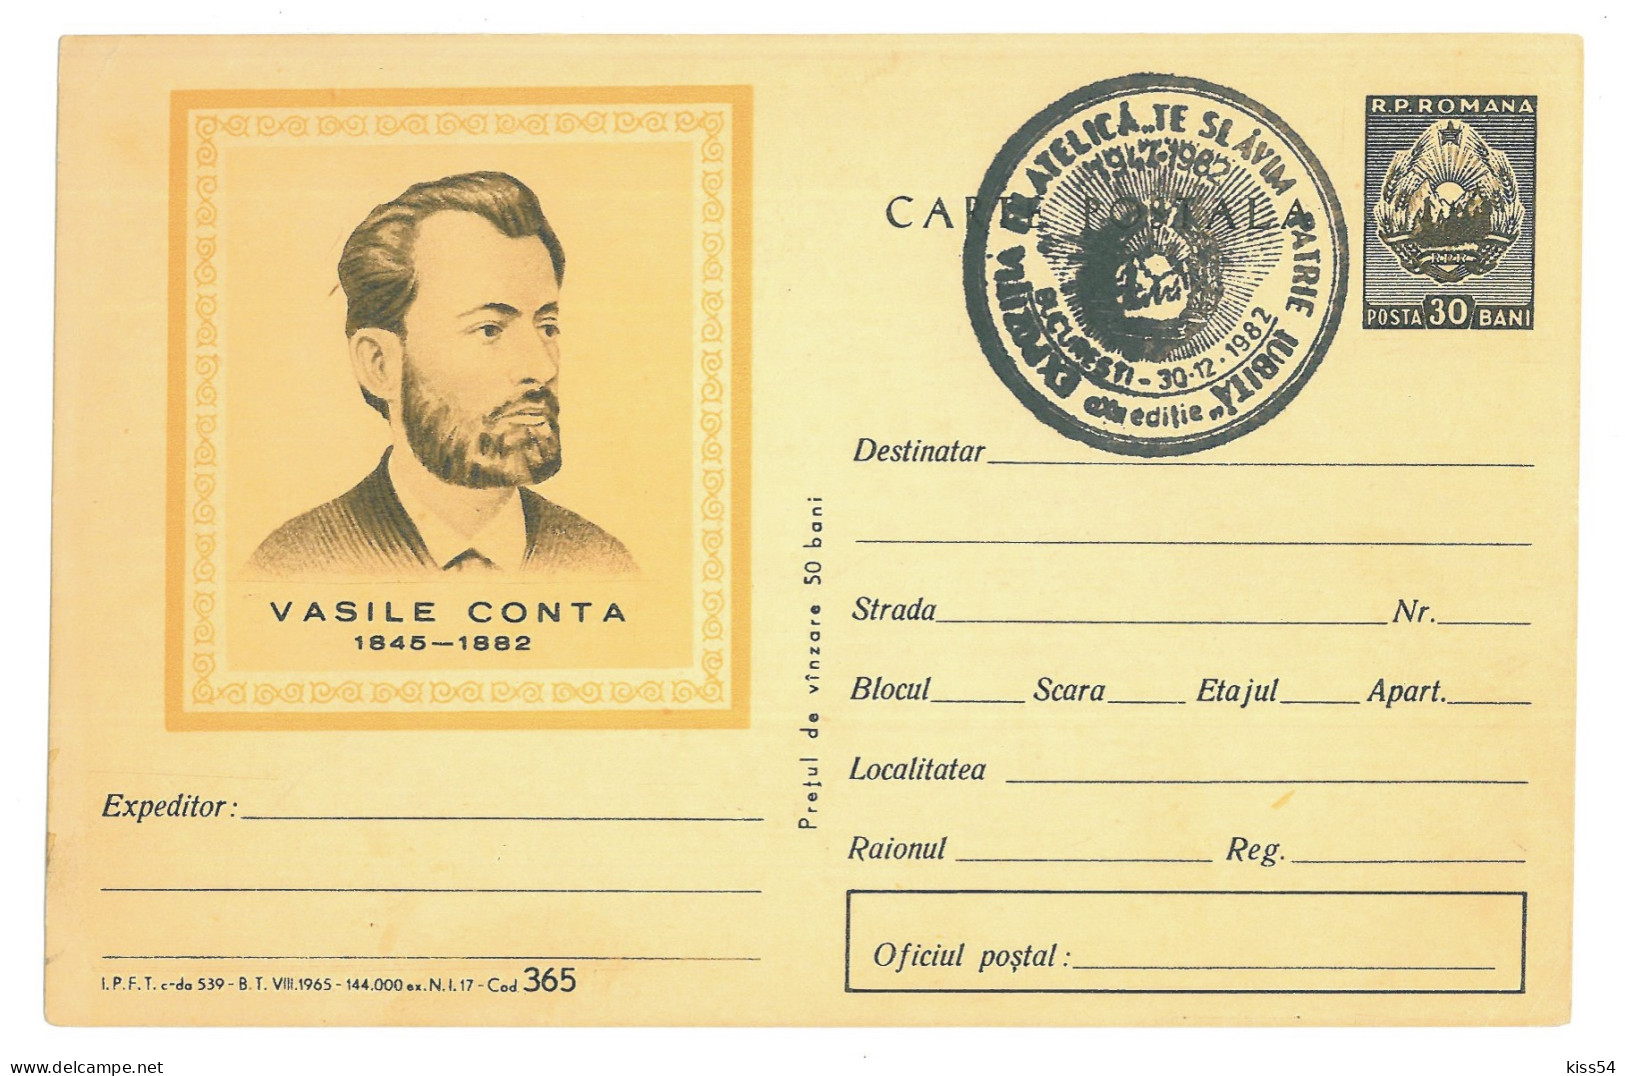 IP 65 A - 0365 VASILE CONTA, Iasi, Philosopher And Politician Romania - Stationery - Used - 1965 - Postal Stationery